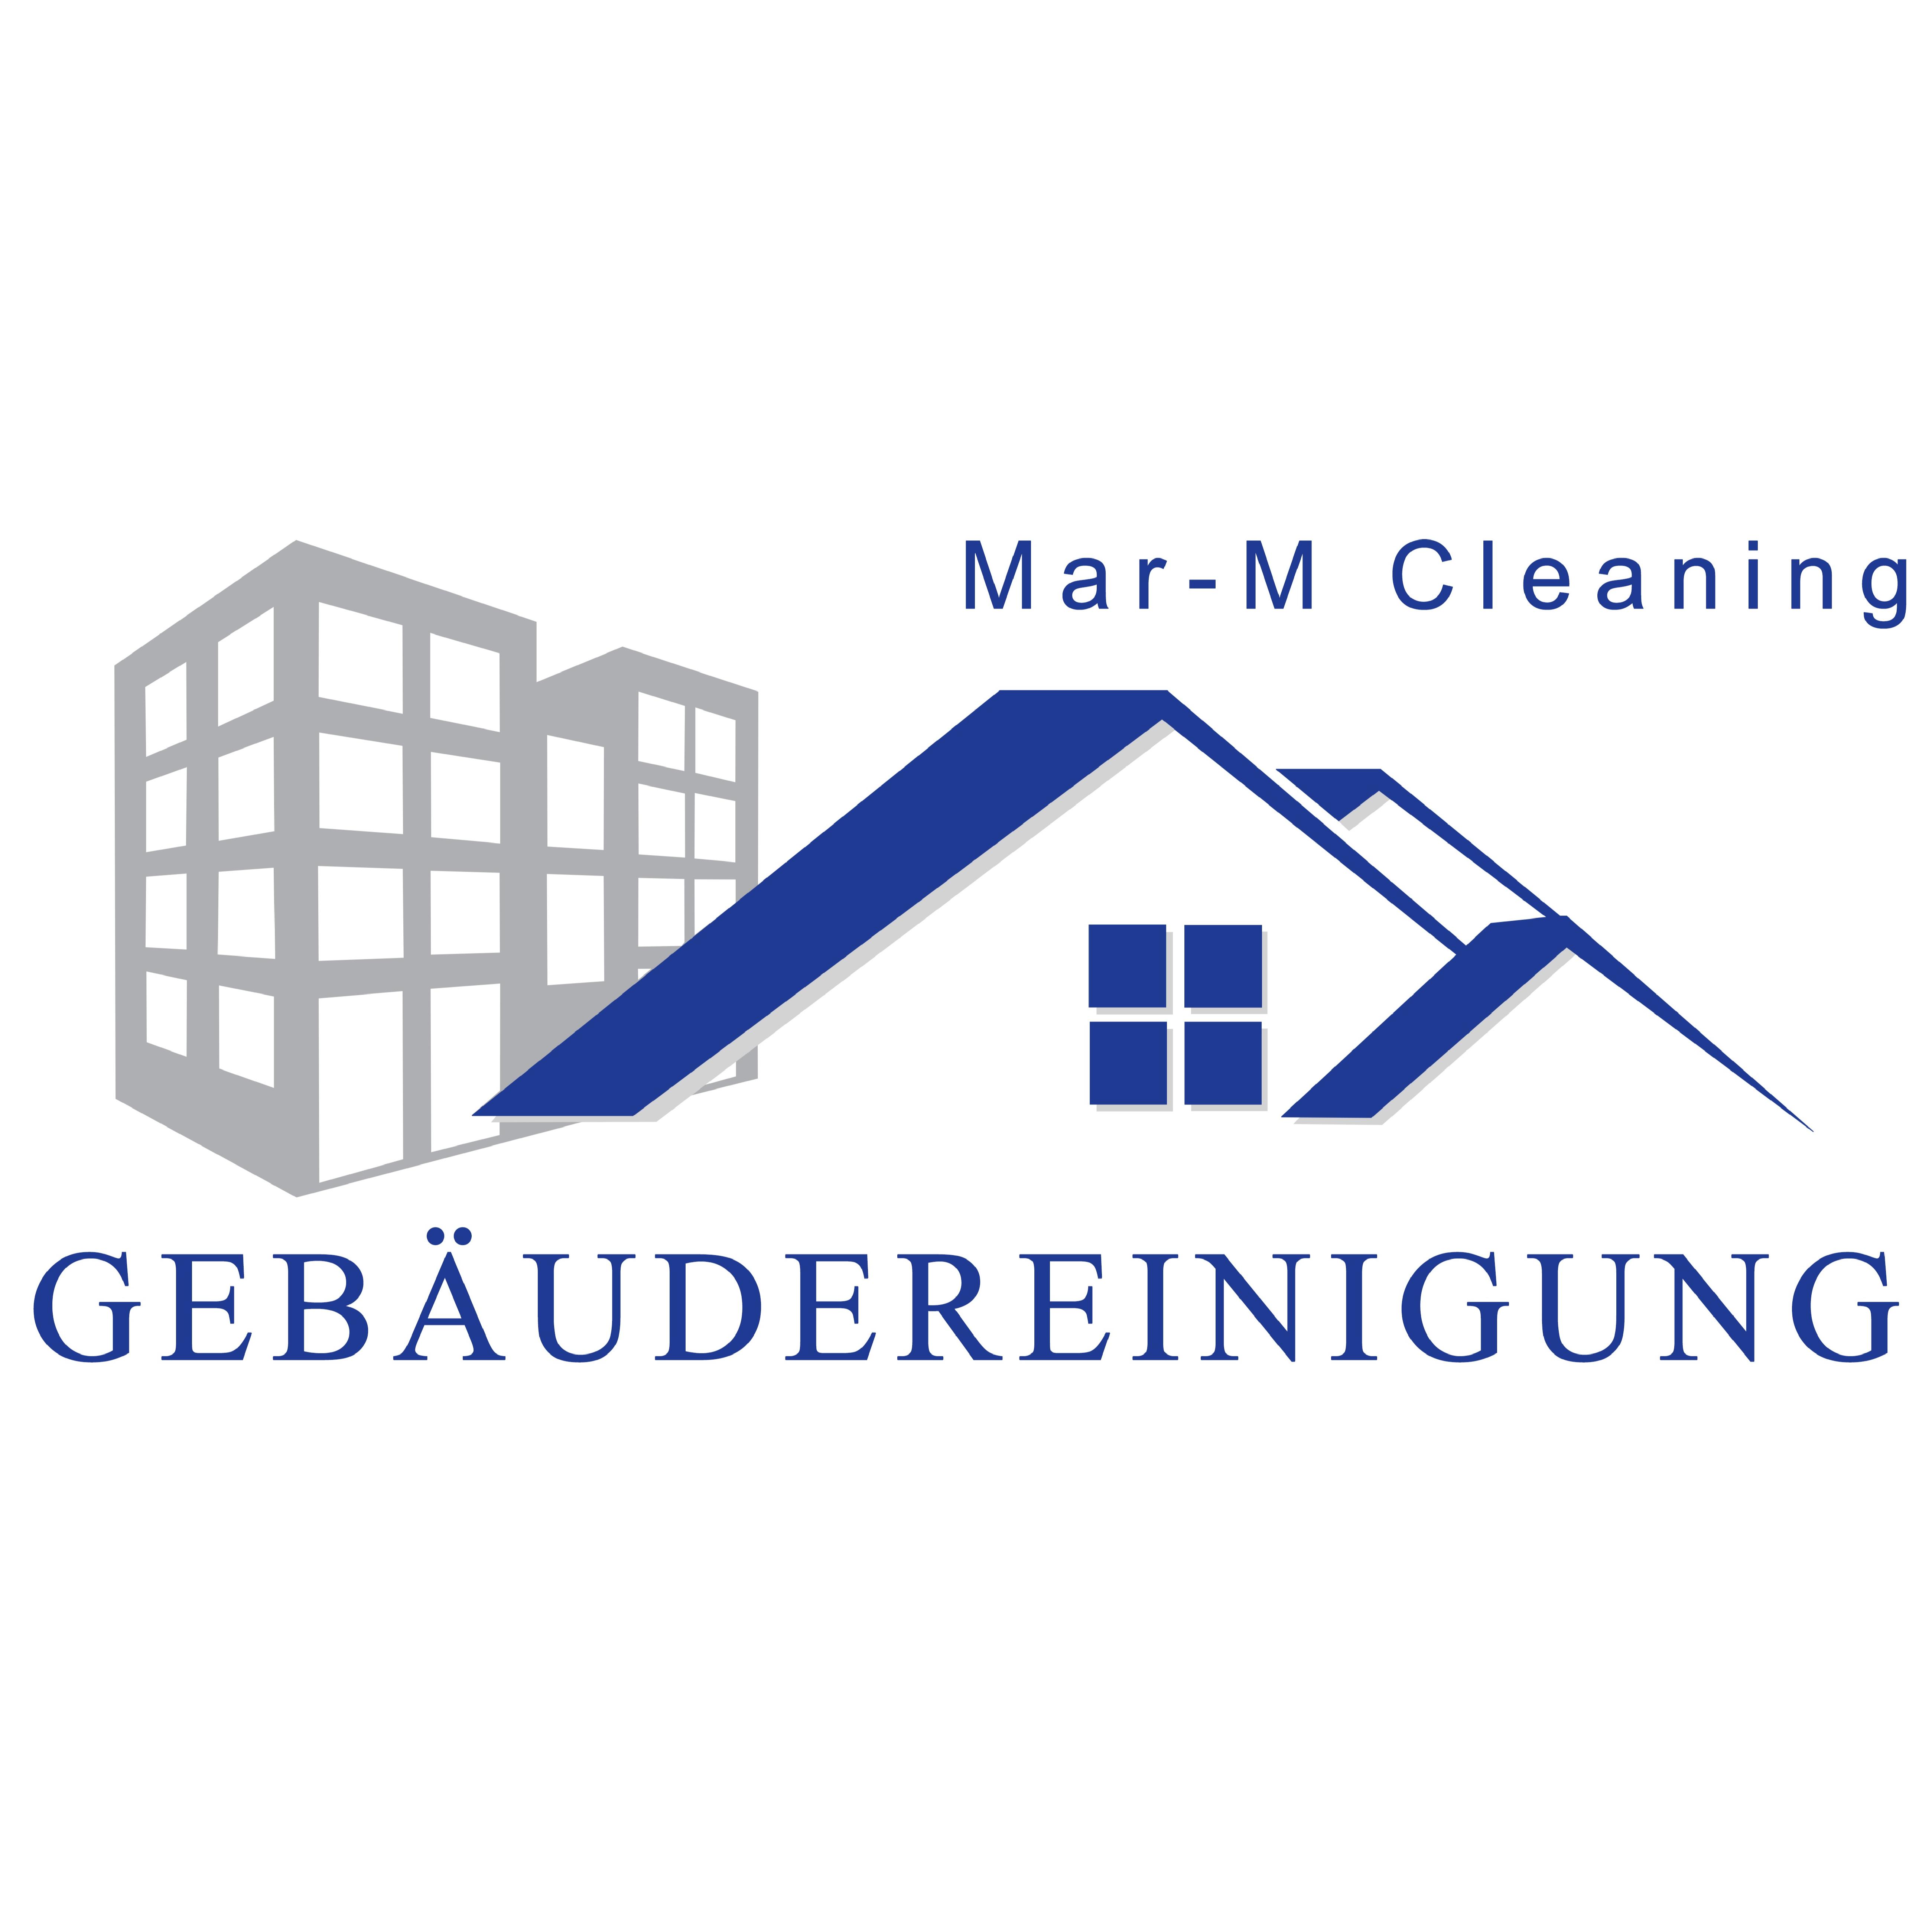 Mar-M Cleaning Logo